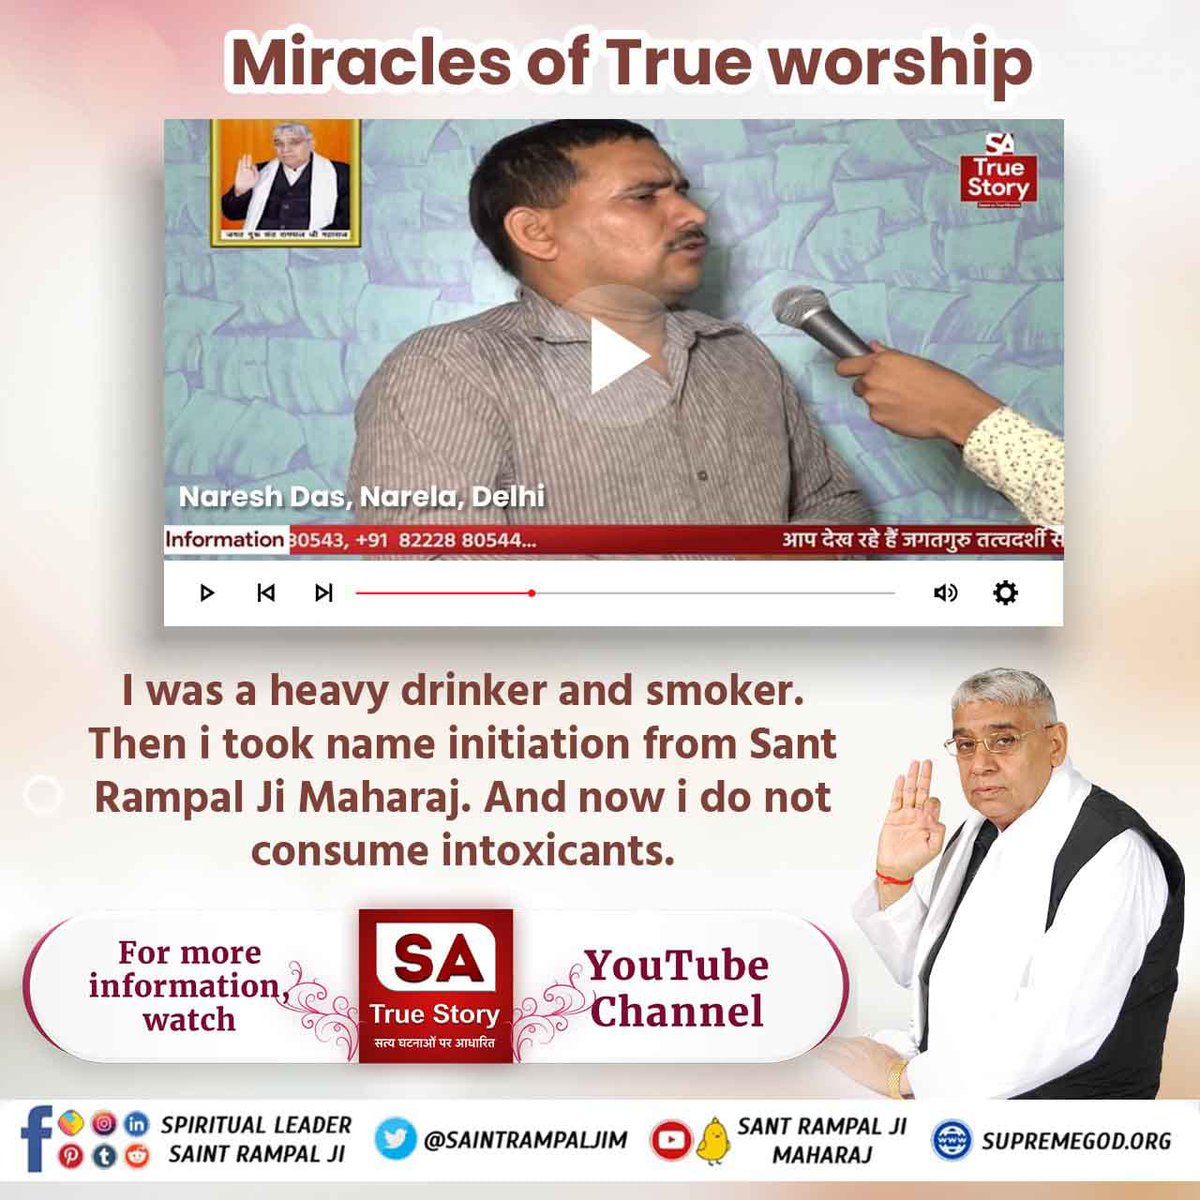 #GodNightFriday 
#ऐसे_सुख_देता_है_भगवान
Miracles of True worship
I was a heavy drinker and smoker. Then i took name initiation from Sant Rampal Ji Maharaj. And now i do not consume intoxicants.
Naresh Das, Narela, Delhi
Must Watch 👉 SA True Story  YouTube Channel